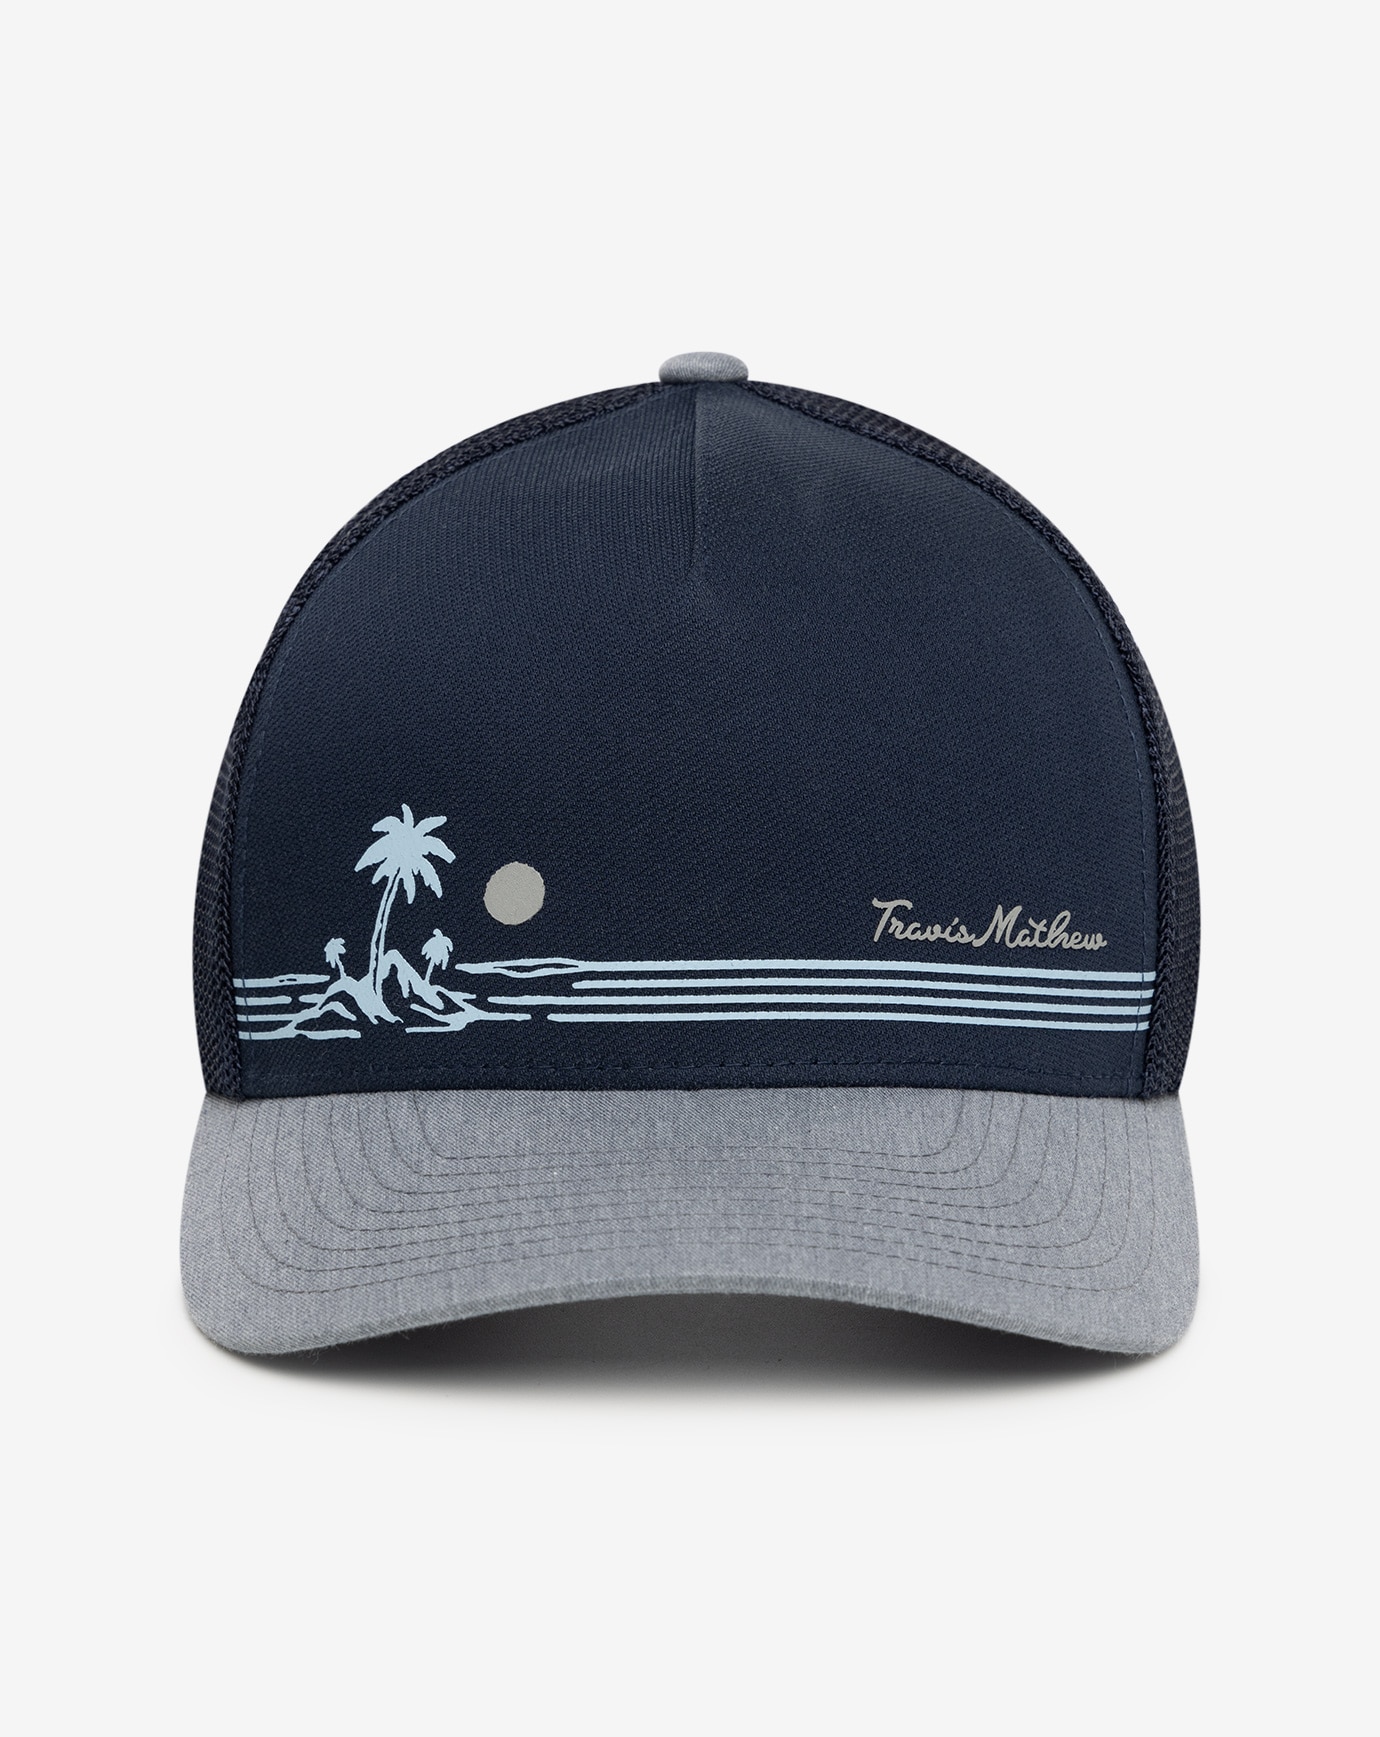 Related Product - LAKE CHAPALA YOUTH HAT